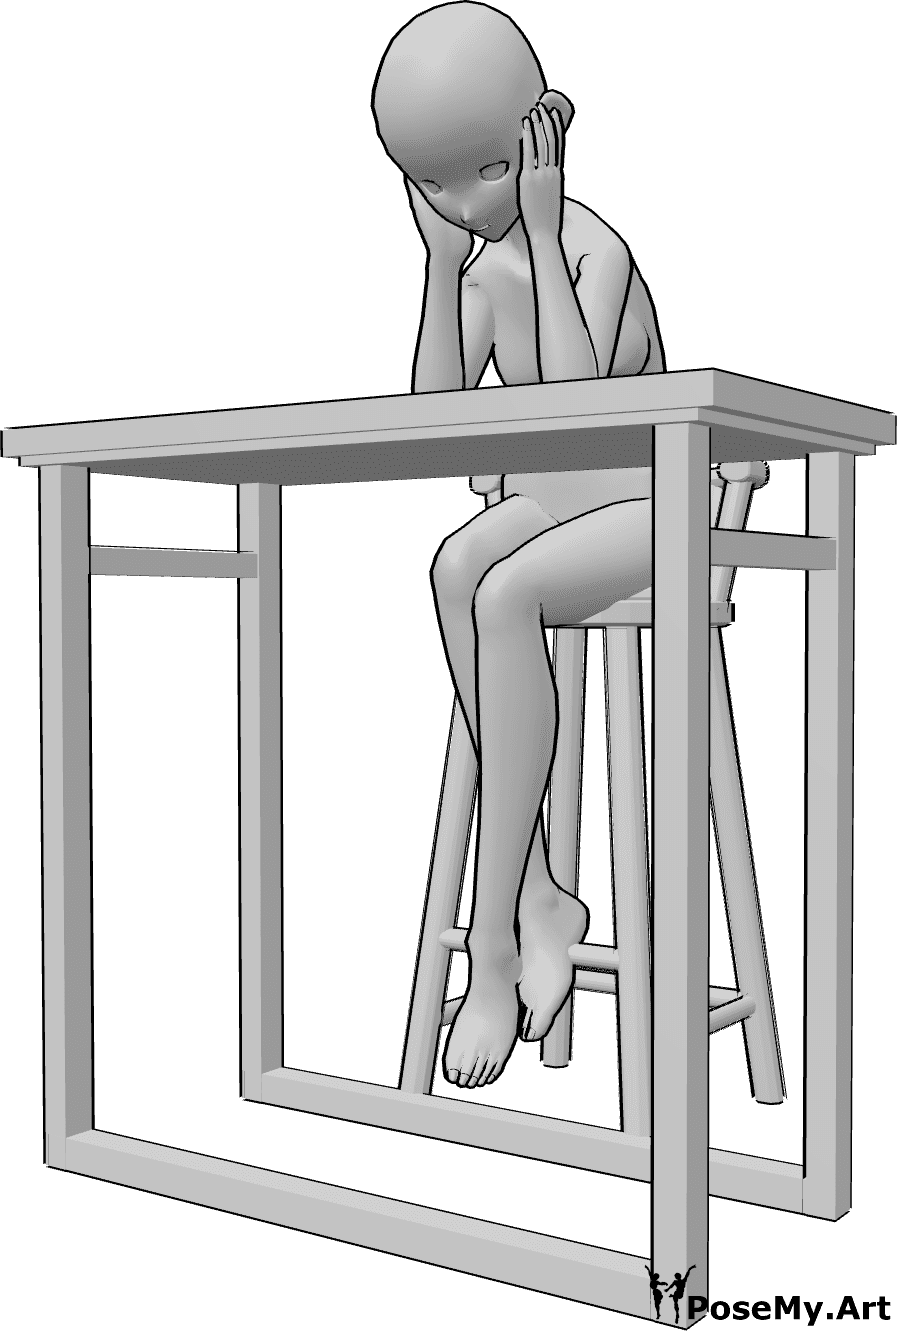 Pose Reference- Sad anime female pose - Sad anime female is sitting on a bar stool, leaning on the bar table, holding her head with both hands